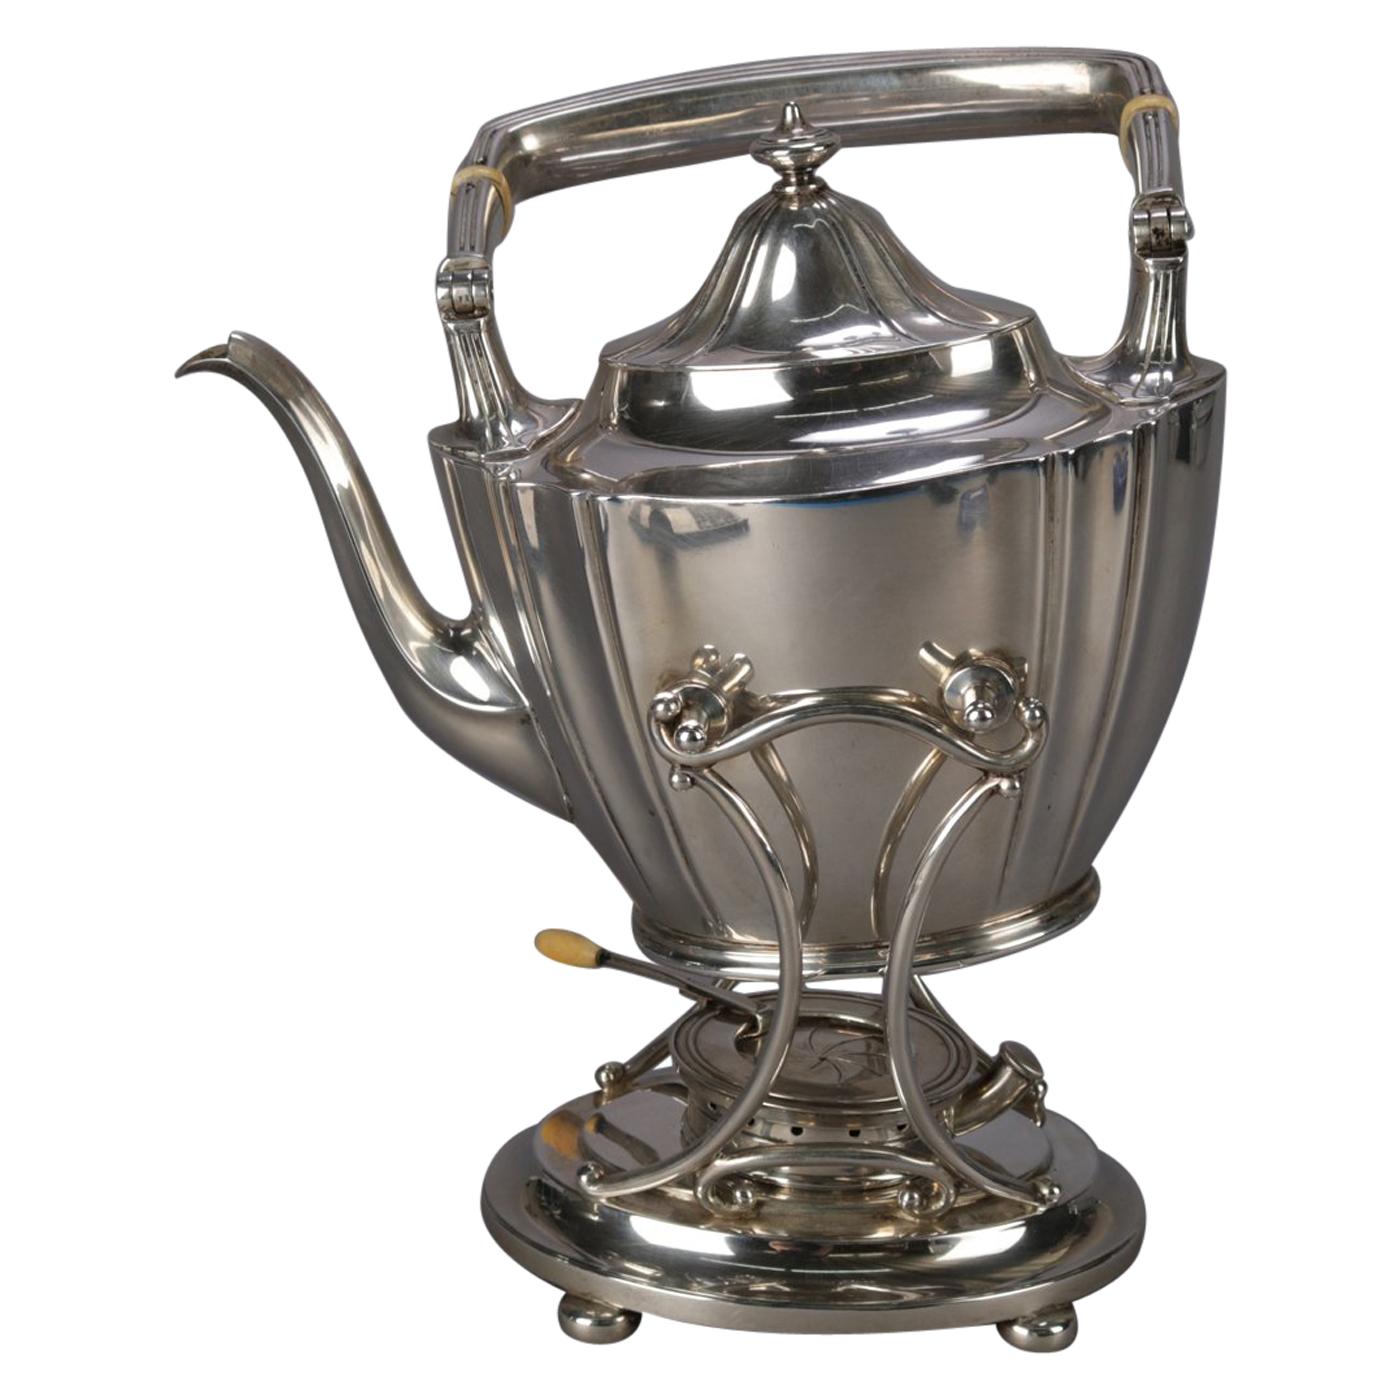 J. E. Caldwell Sterling Silver Teapot on Warming Stand with Burner, 20th Century